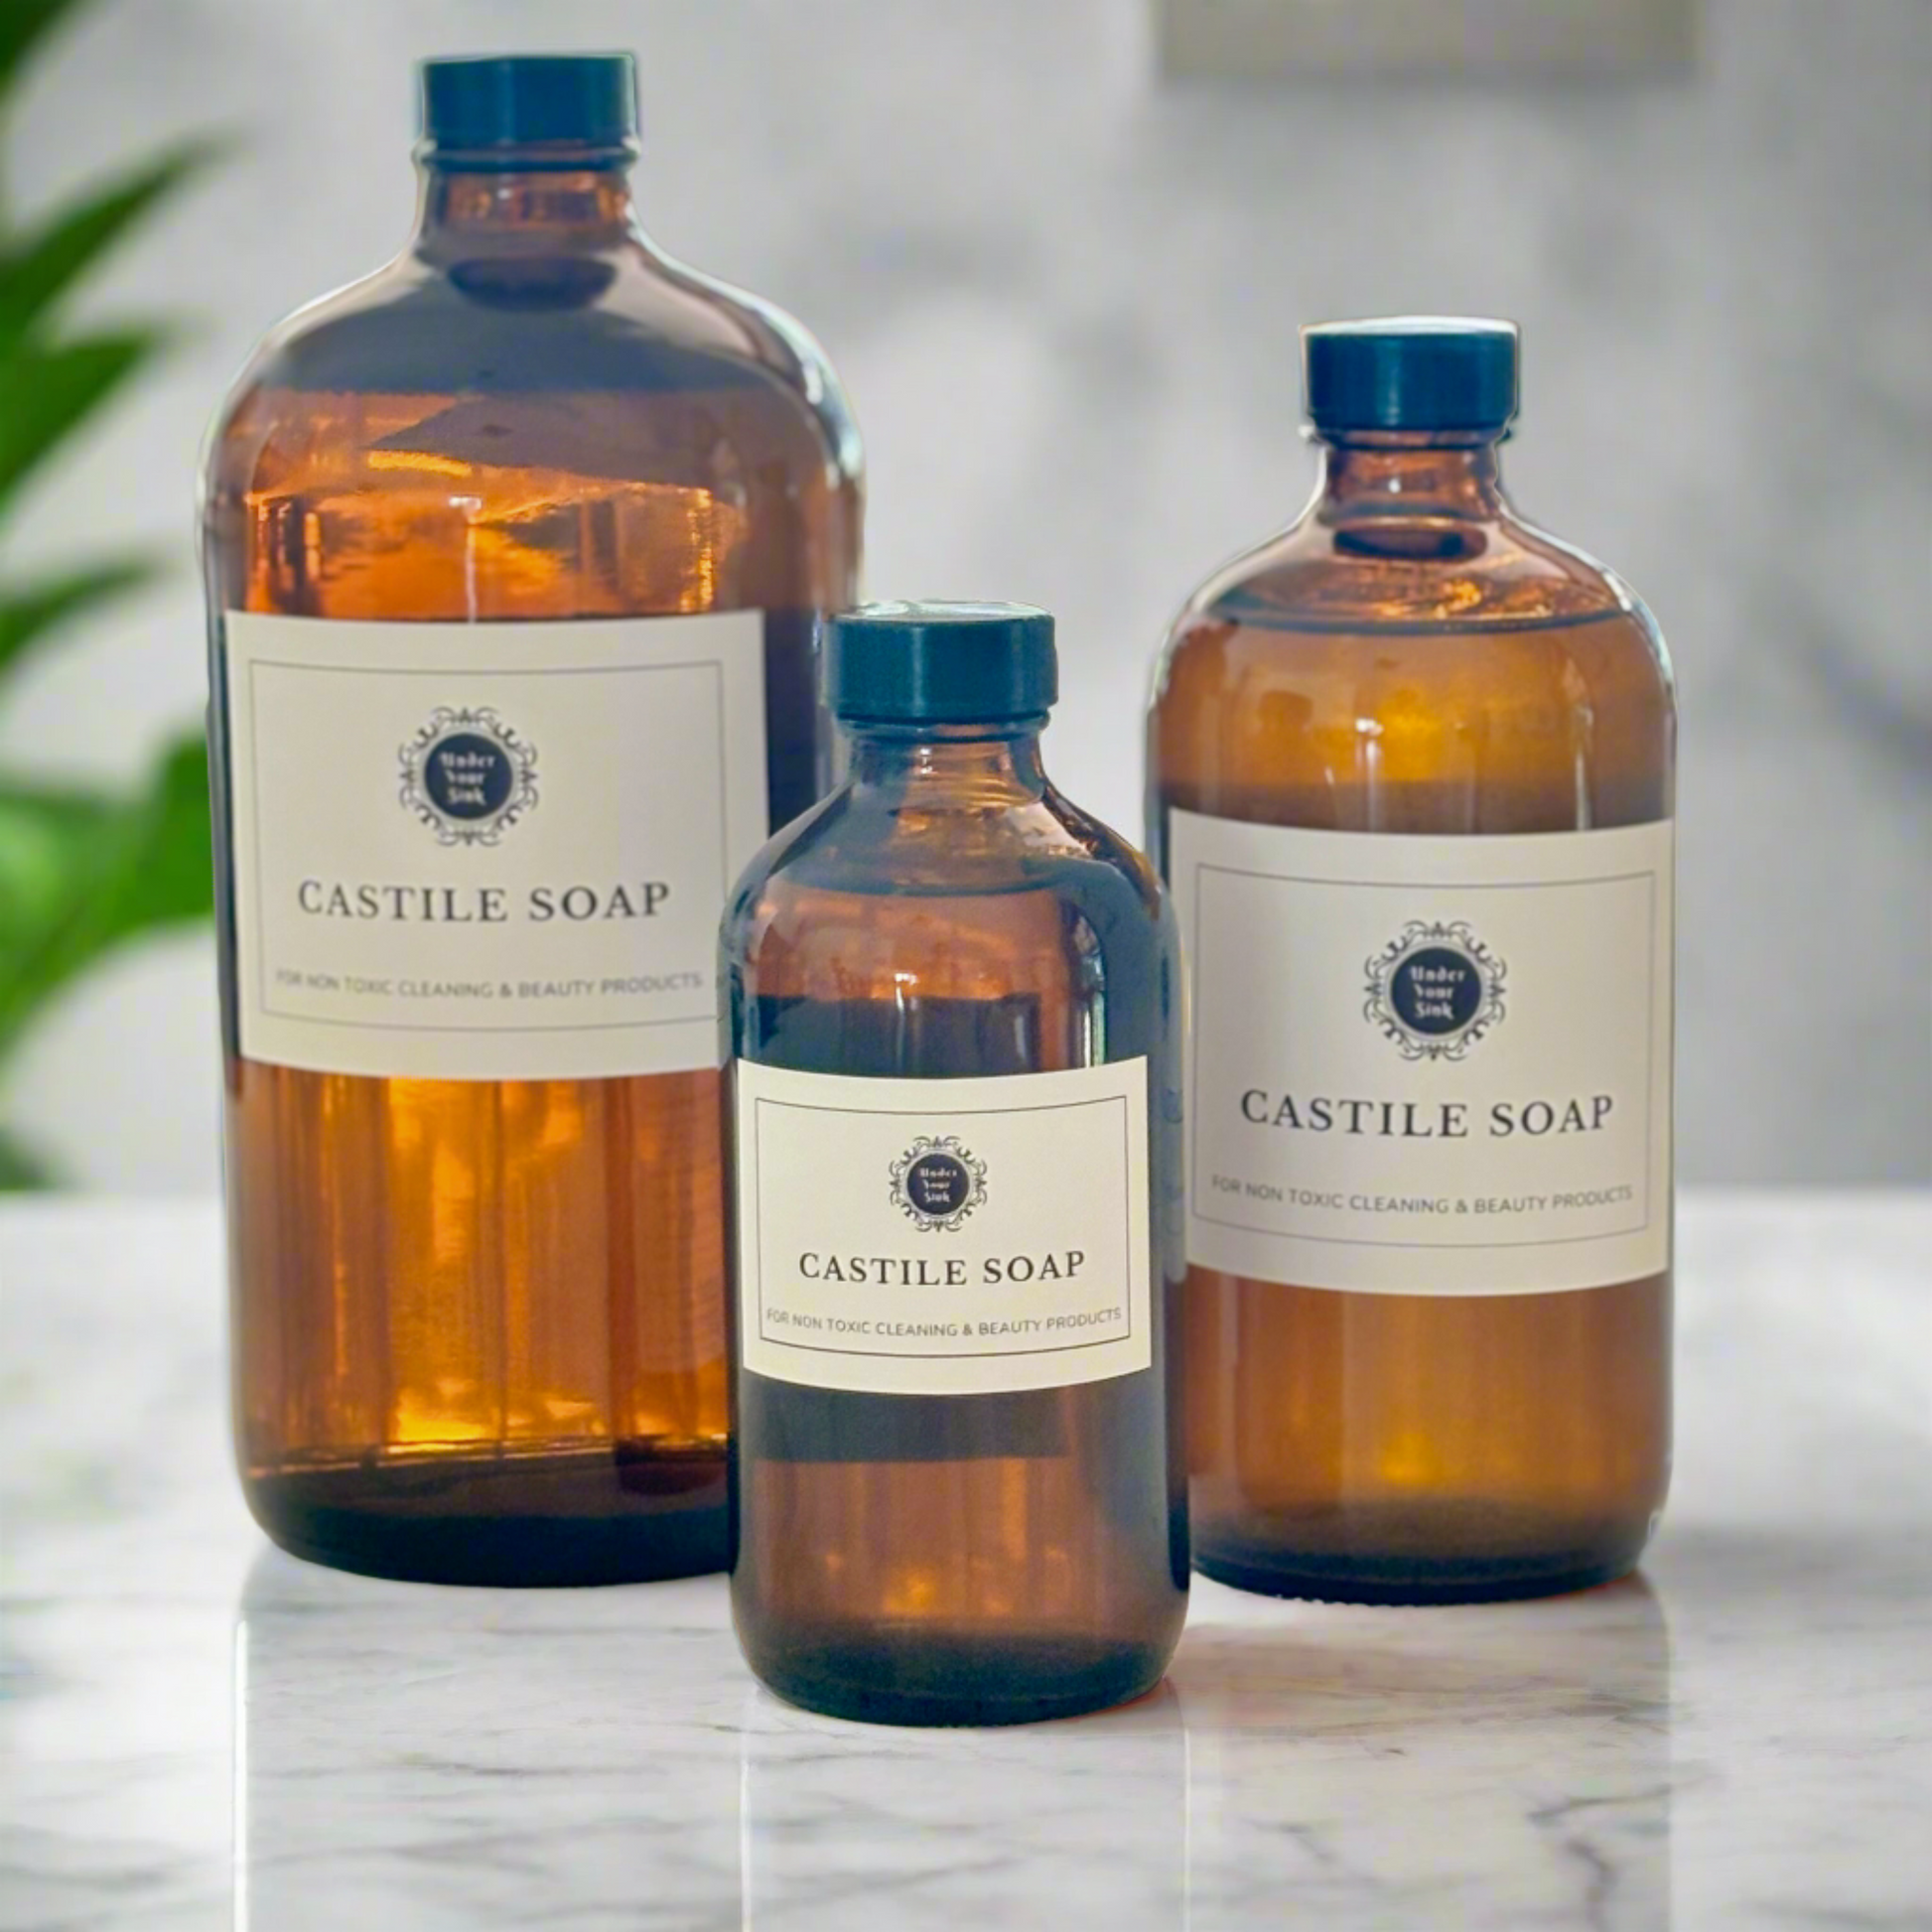 A collection of 3 amber glass bottles in 1litre, 500ml and 250ml sizes. Each has a simple white label with Under your Sink Logo and description Castile Soap – For non toxic cleaning and beauty products. The bottles are set in a kitchen with a blurred background for effect. It is a product image for website as this is for sale in various sizes, online with Australia wide delivery.